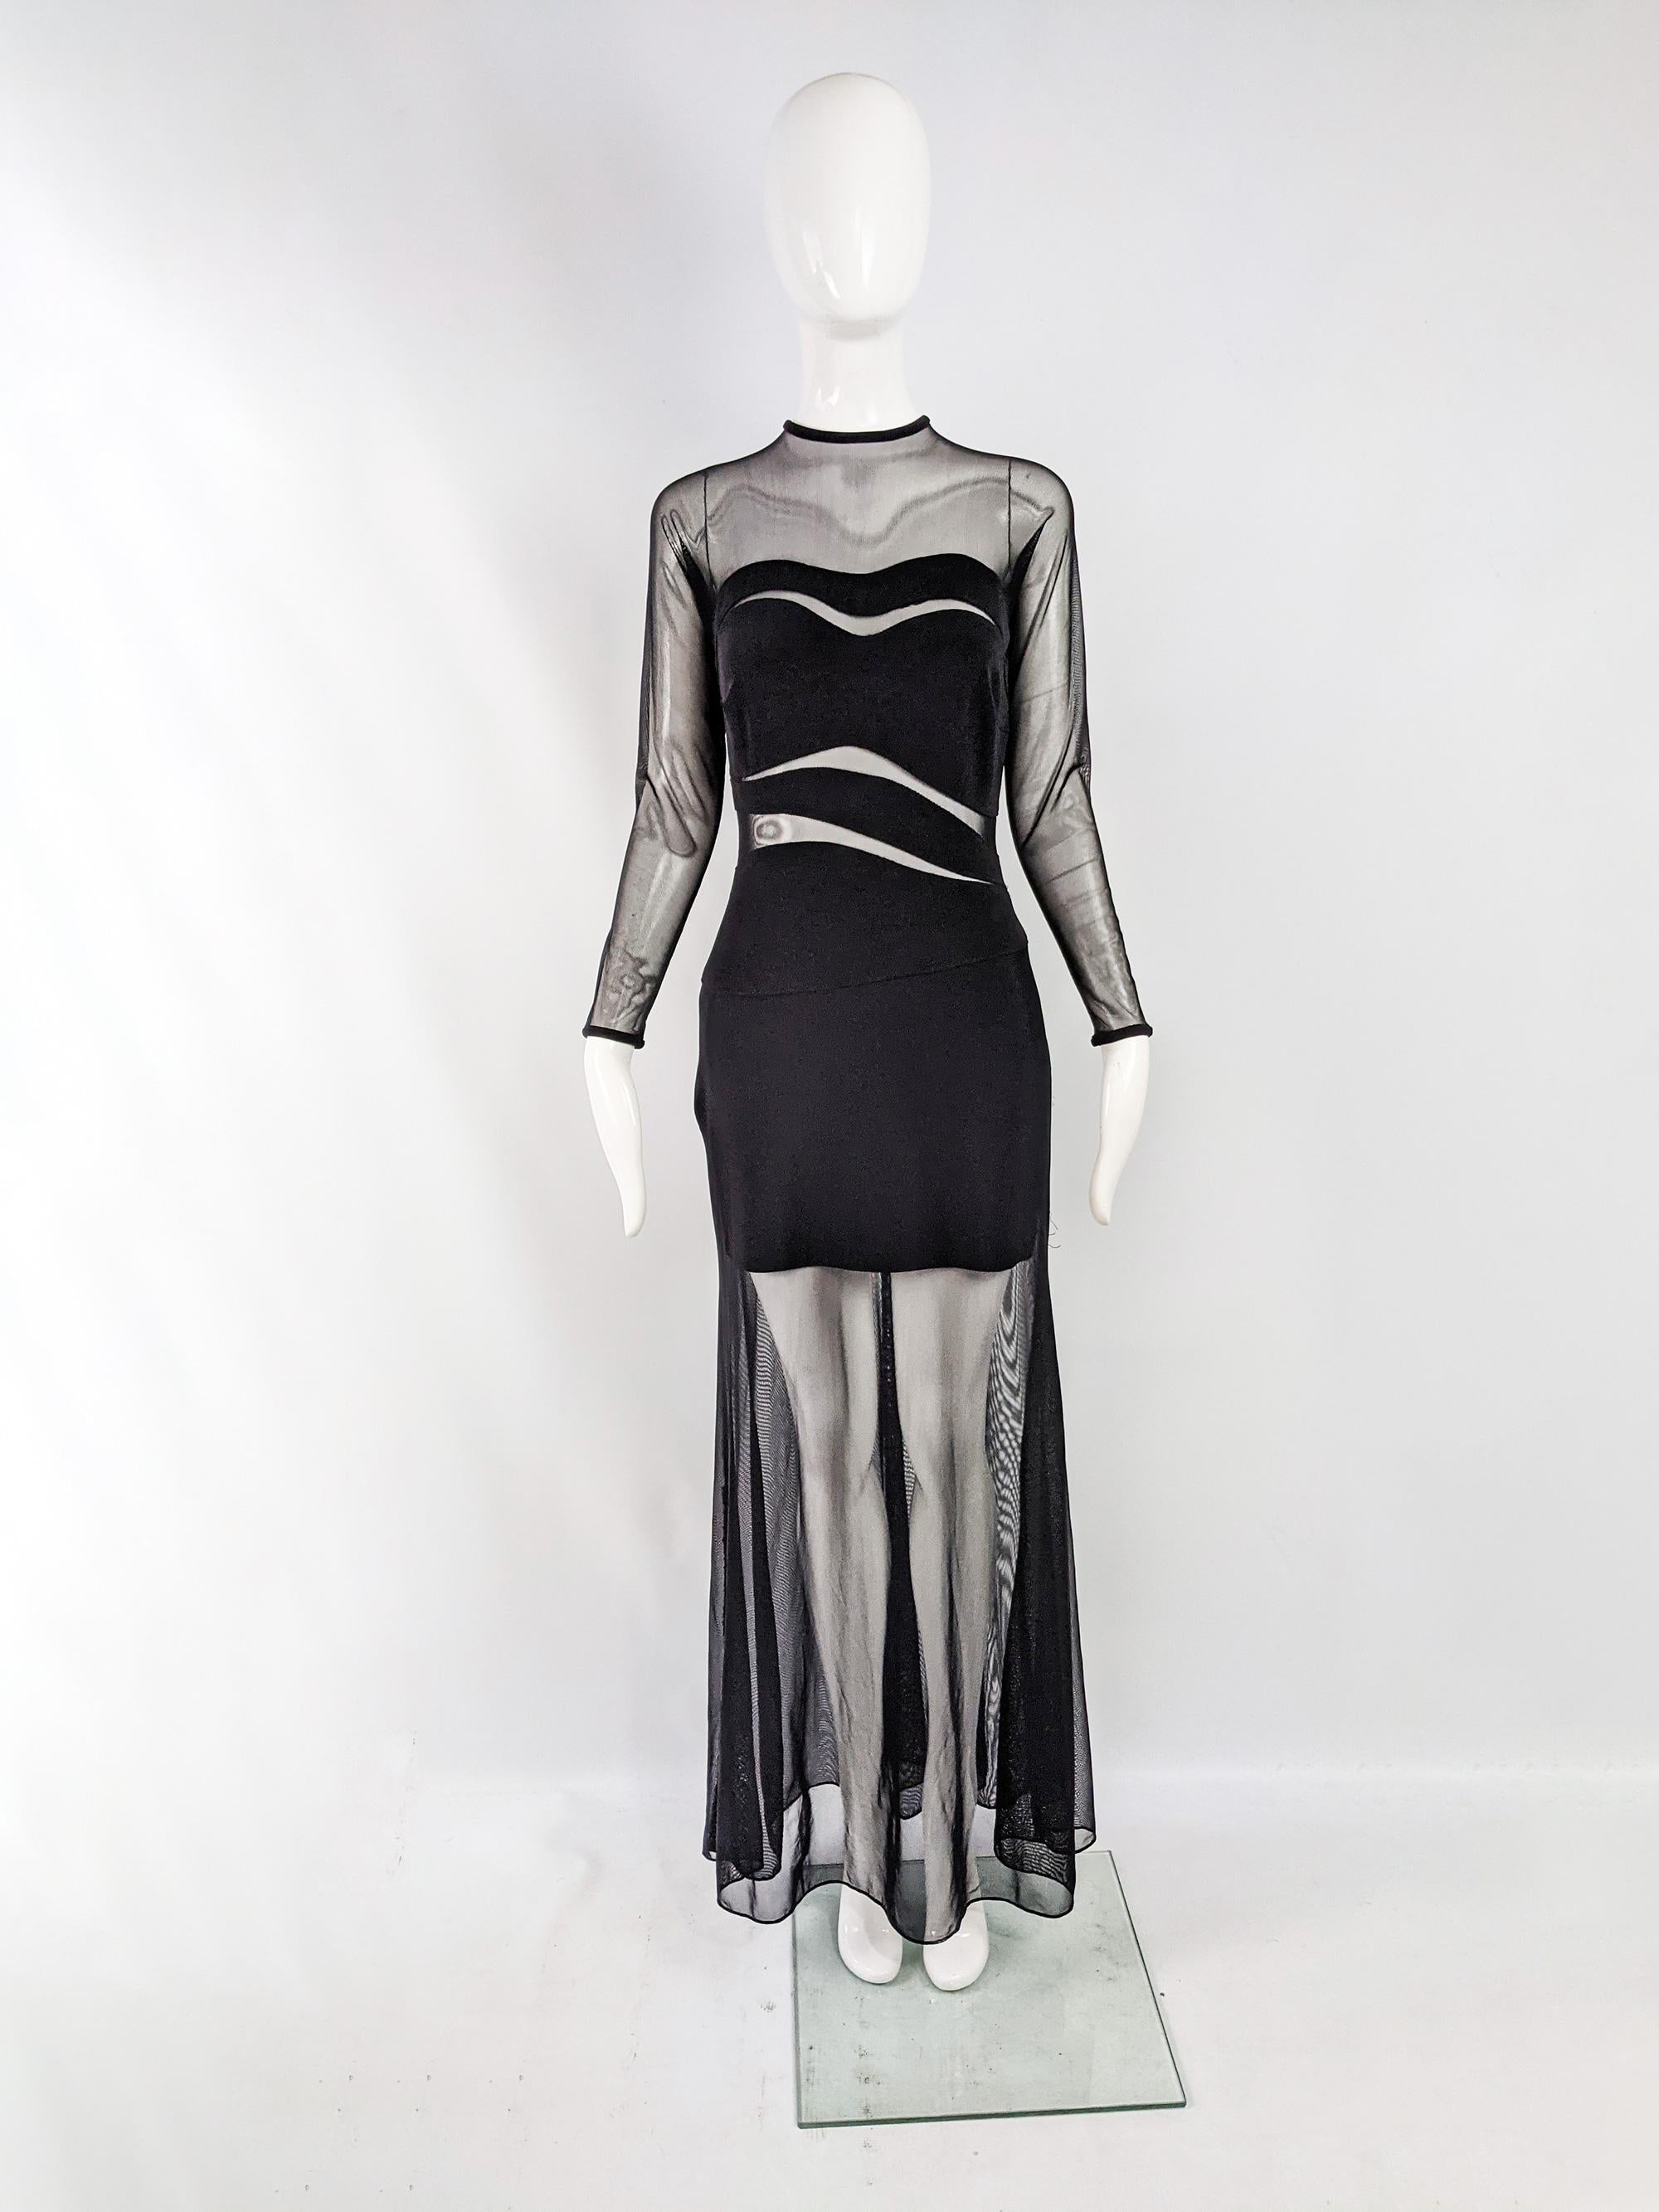 A stunning vintage long sleeve evening gown from the 90s by luxury American- Japanese fashion designer, Tadashi Shoji. In a black bandage material with cut outs and a sheer mesh overlay. 

Size: Marked L but measures like a UK 10-12/ US 6-8. Please